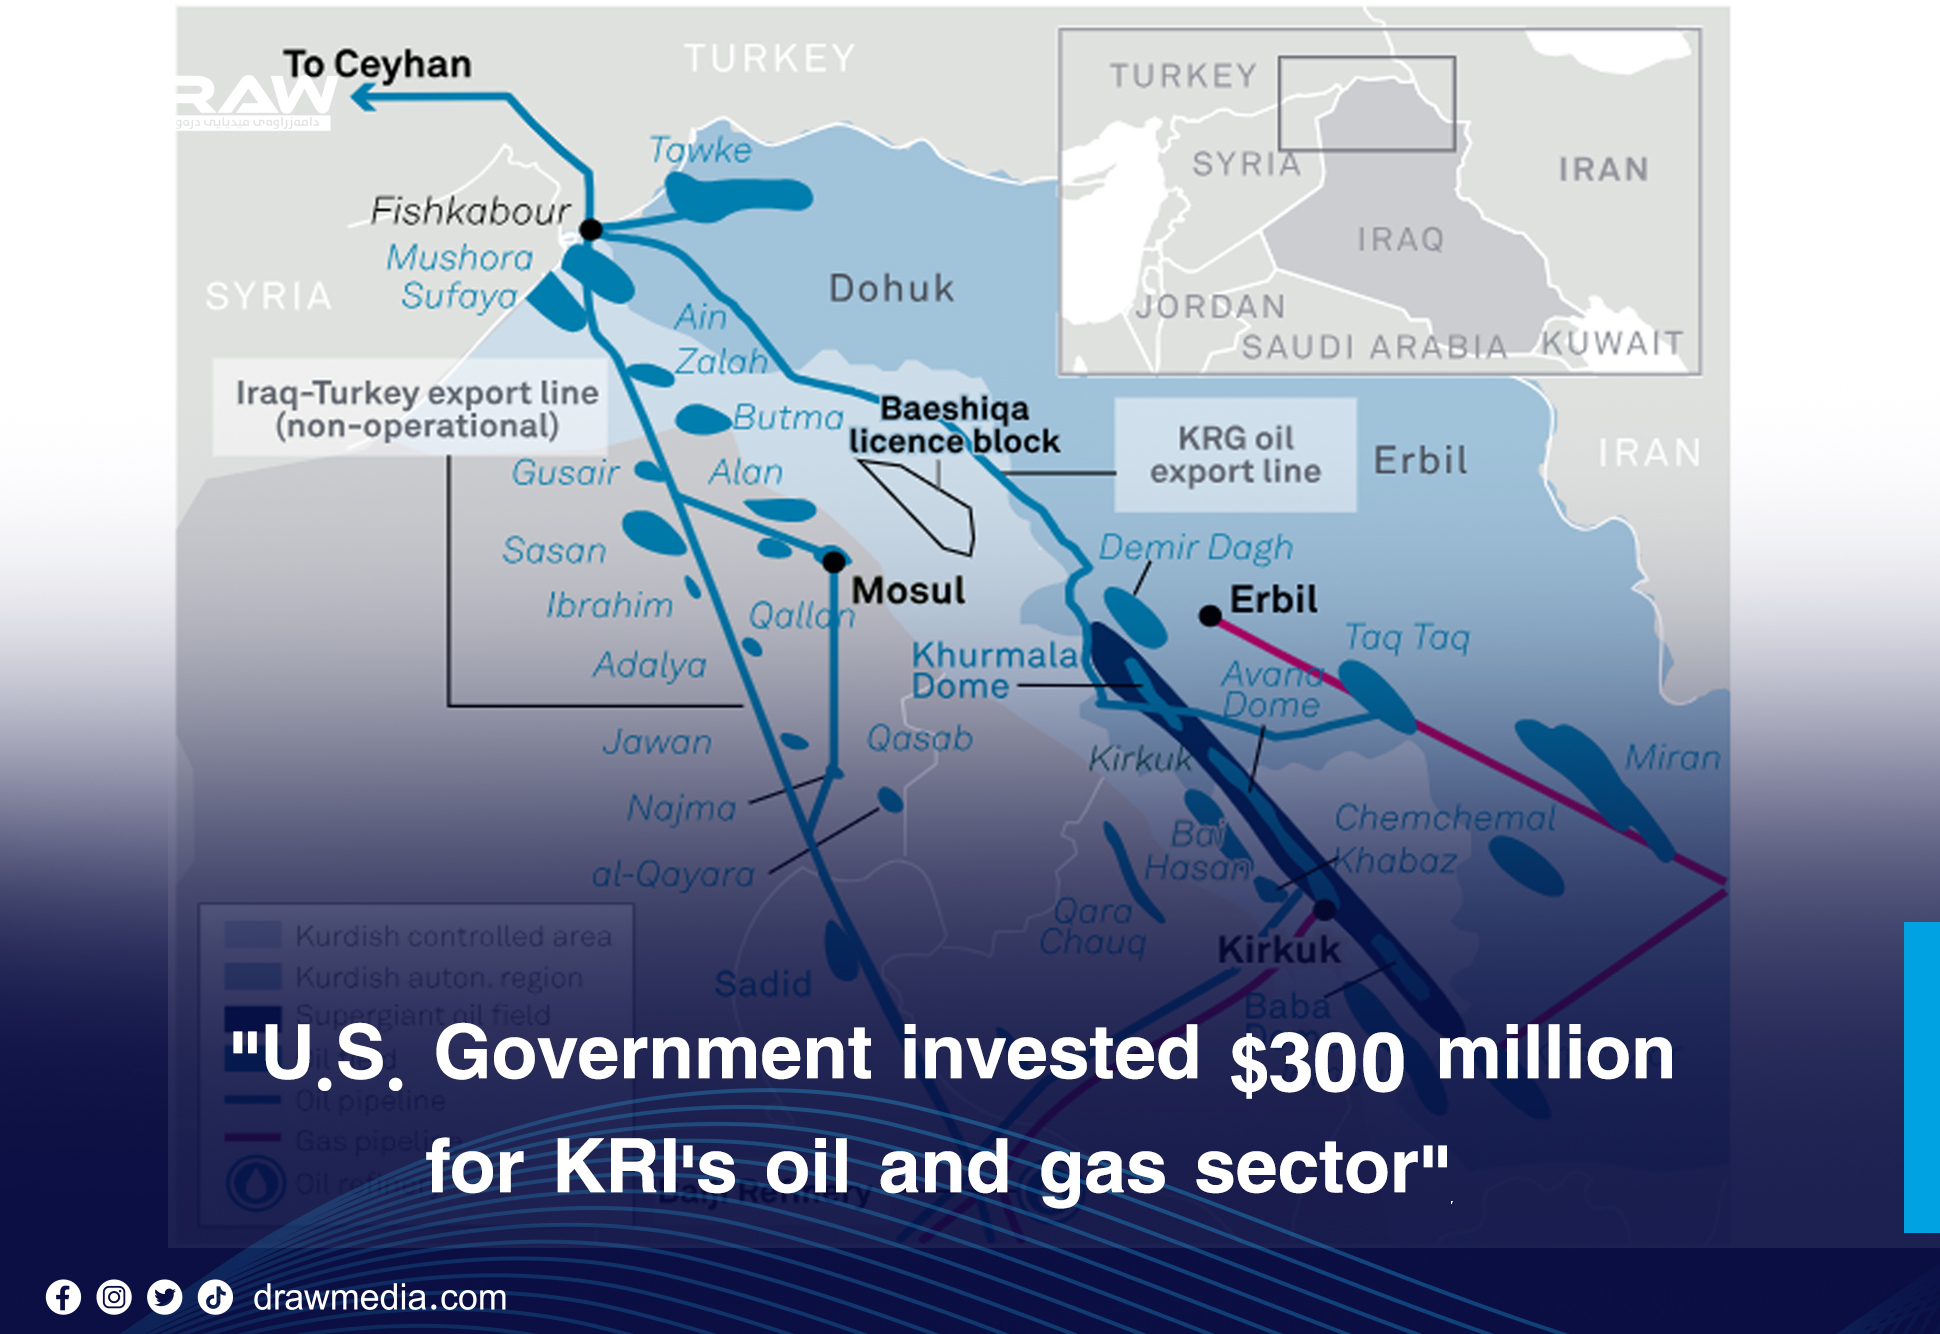 DrawMedia.net / U.S. Government invested $300 million for KRI's oil and gas sector